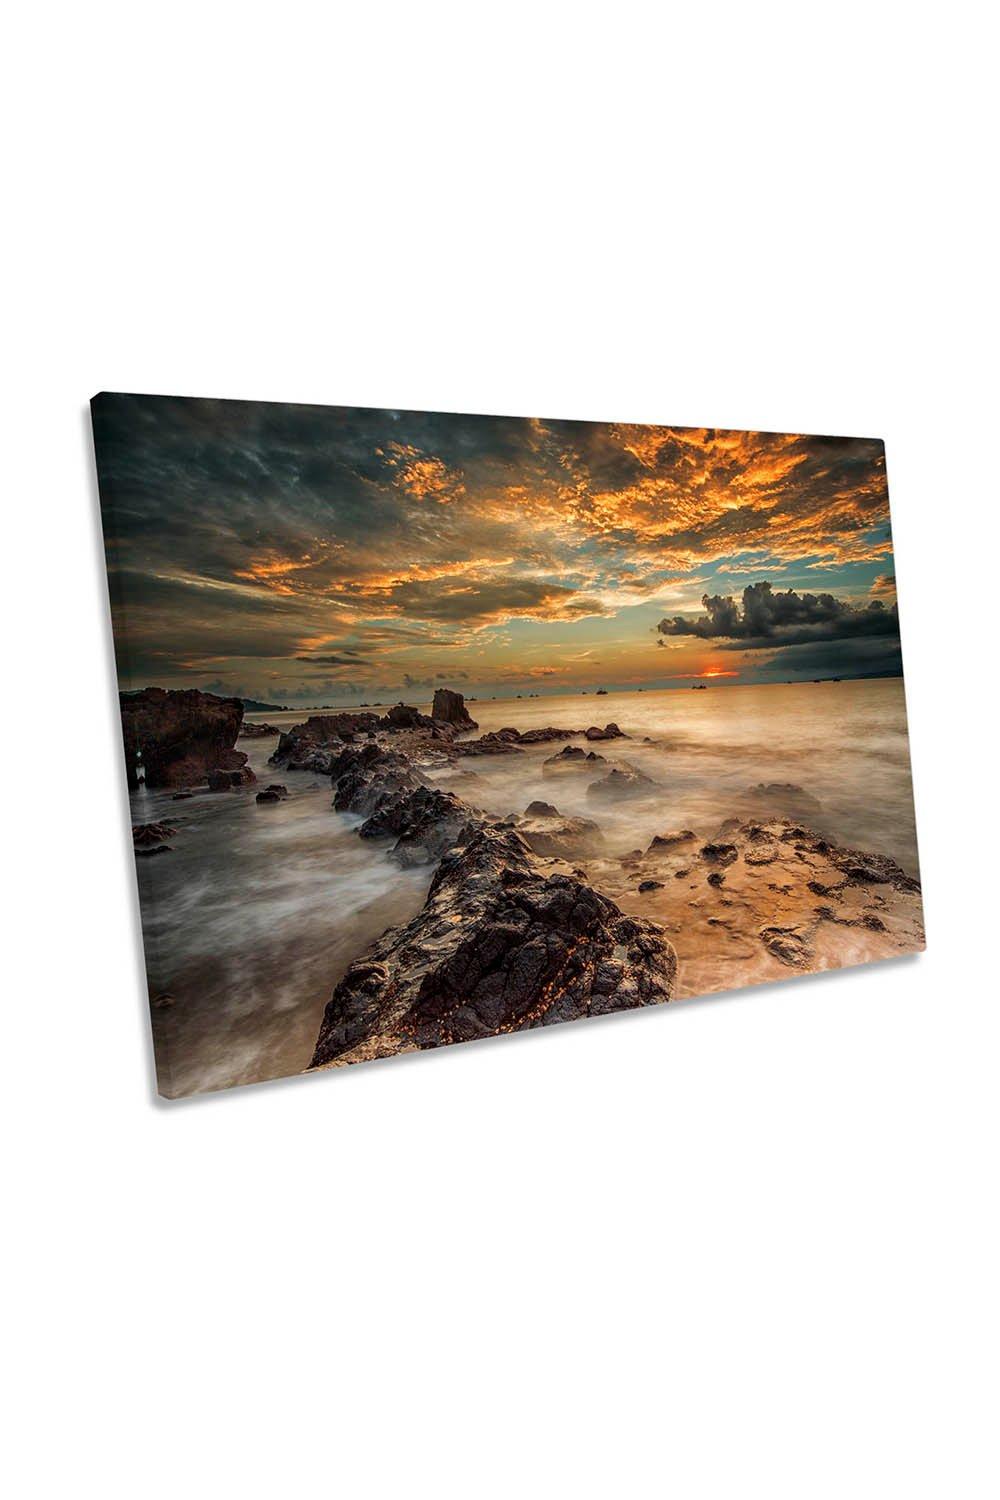 Angry Beach Orange Sunset Canvas Wall Art Picture Print